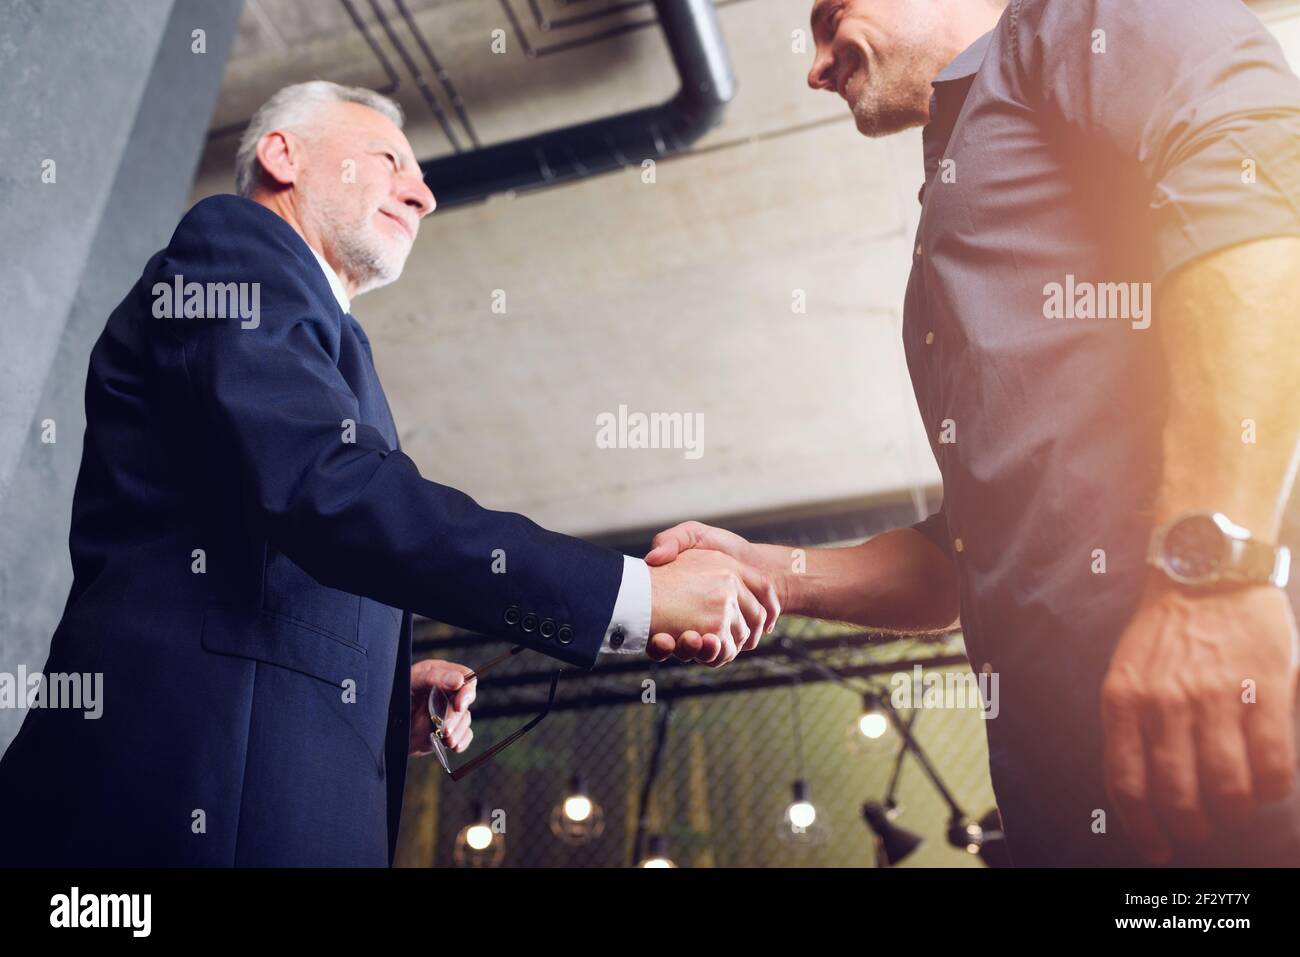 Handshaking business person in office. concept of teamwork and partnership. Stock Photo